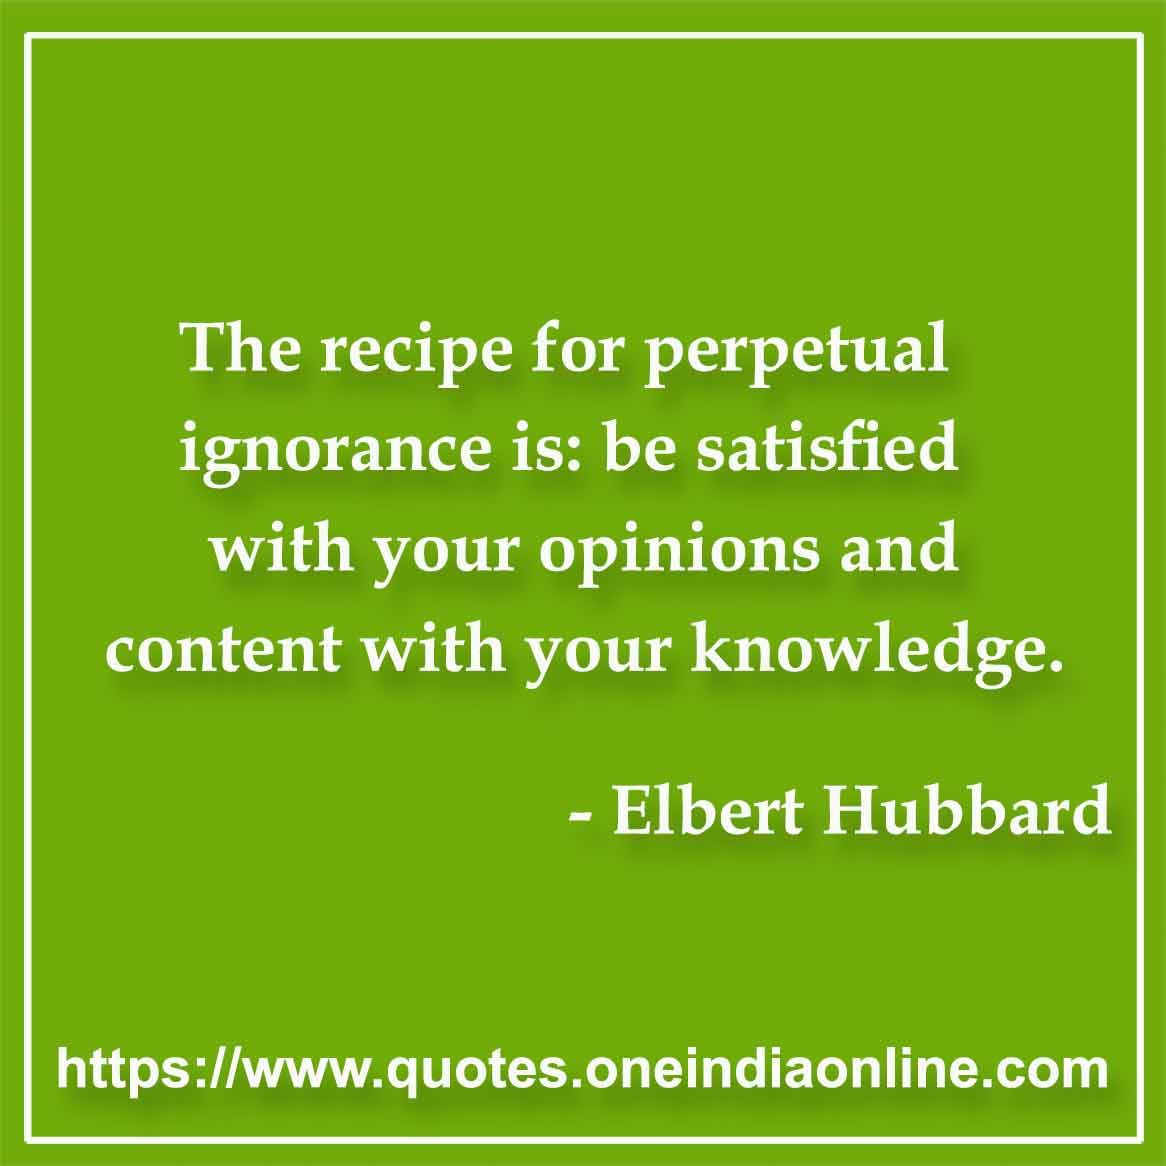 The recipe for perpetual ignorance is: be satisfied with your opinions and content with your knowledge.

- Opinions Quotes by Elbert Hubbard 